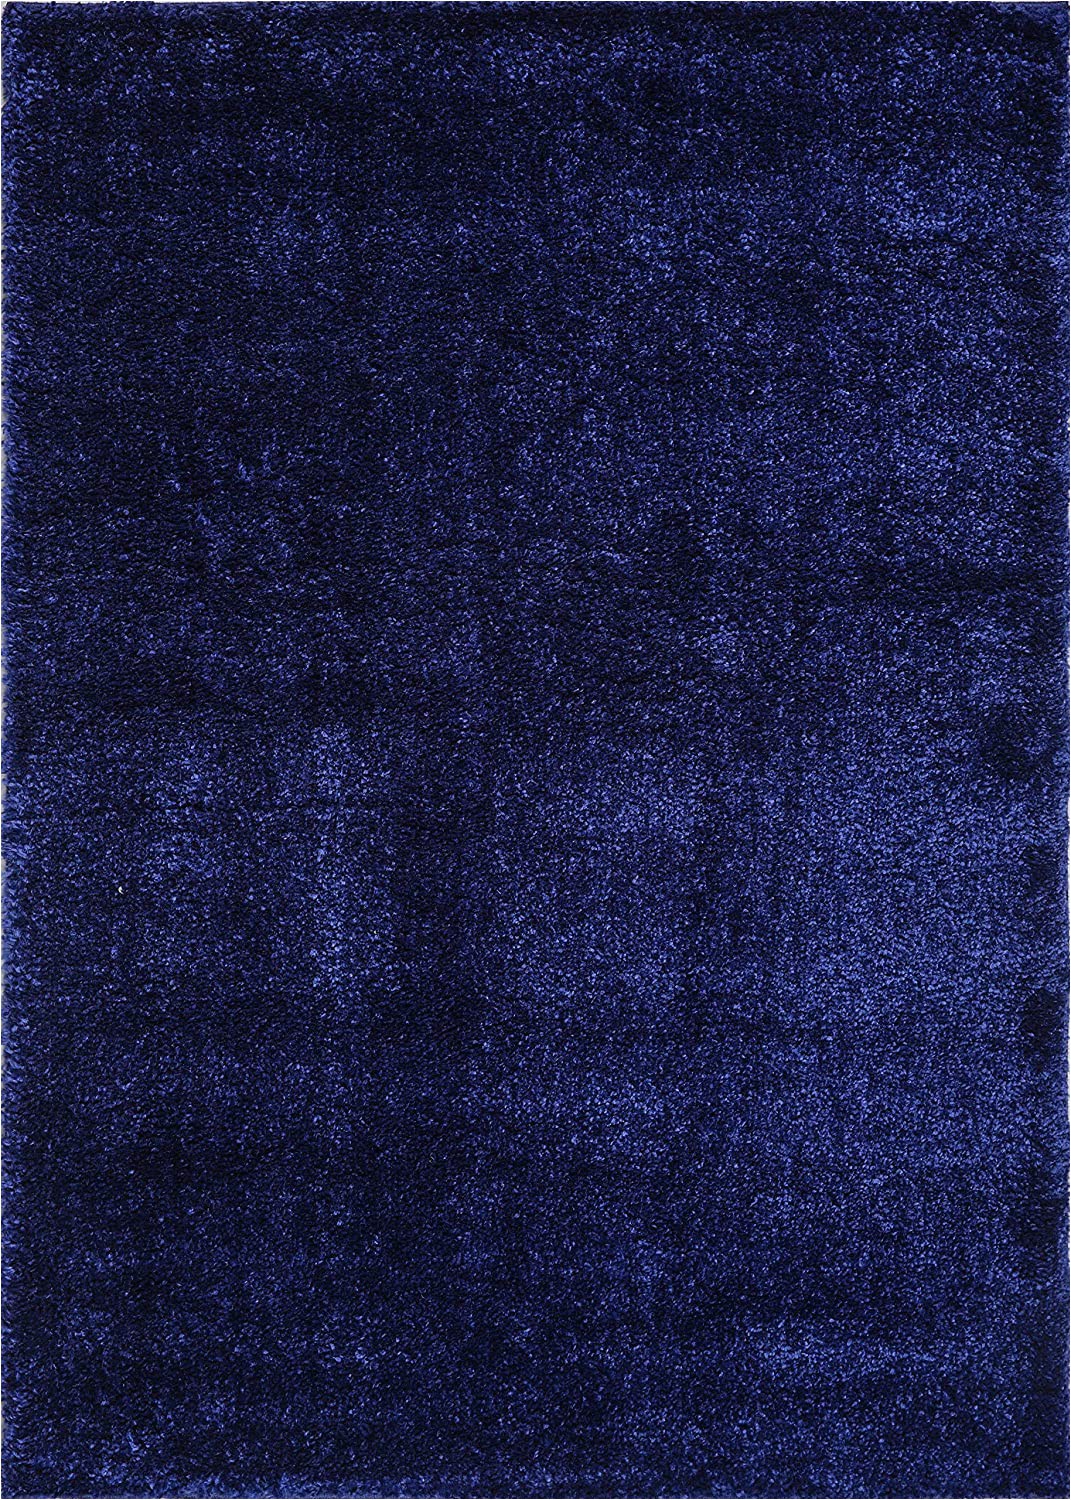 Royal Blue Fluffy Rug Ladole Rugs Shaggy soft Plush Smooth solid Plain Color Modern Durable area Rug Carpet for Living Room Bedroom In Navy Blue 5 3" X 7 6" 160cm X 230cm